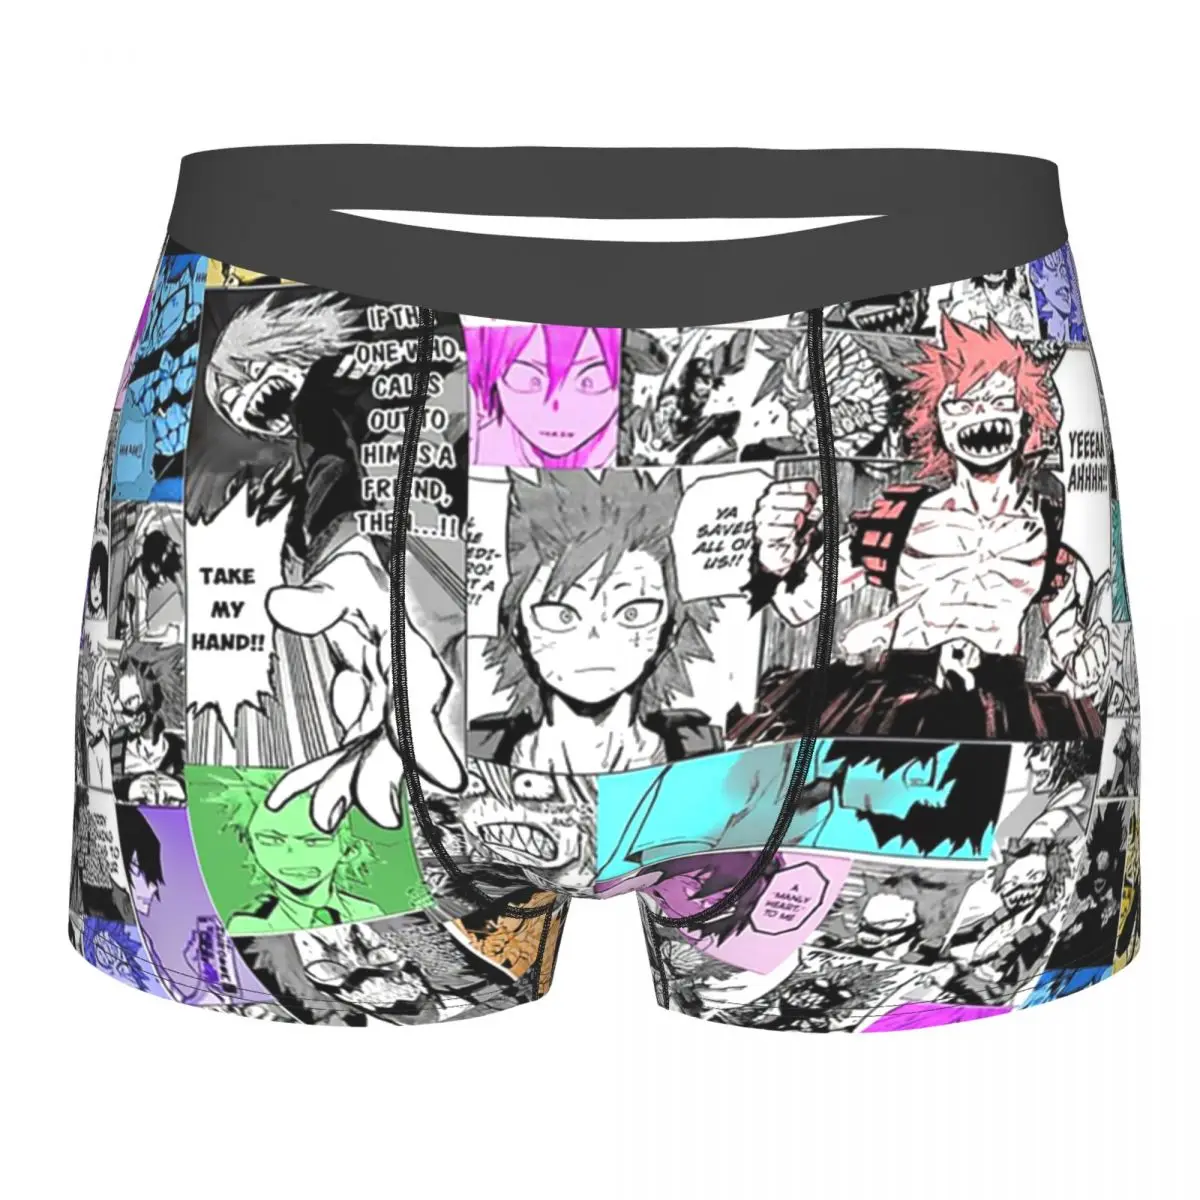 Red Riot V2 Underpants Breathbale Panties Male Underwear Print Shorts Boxer Briefs